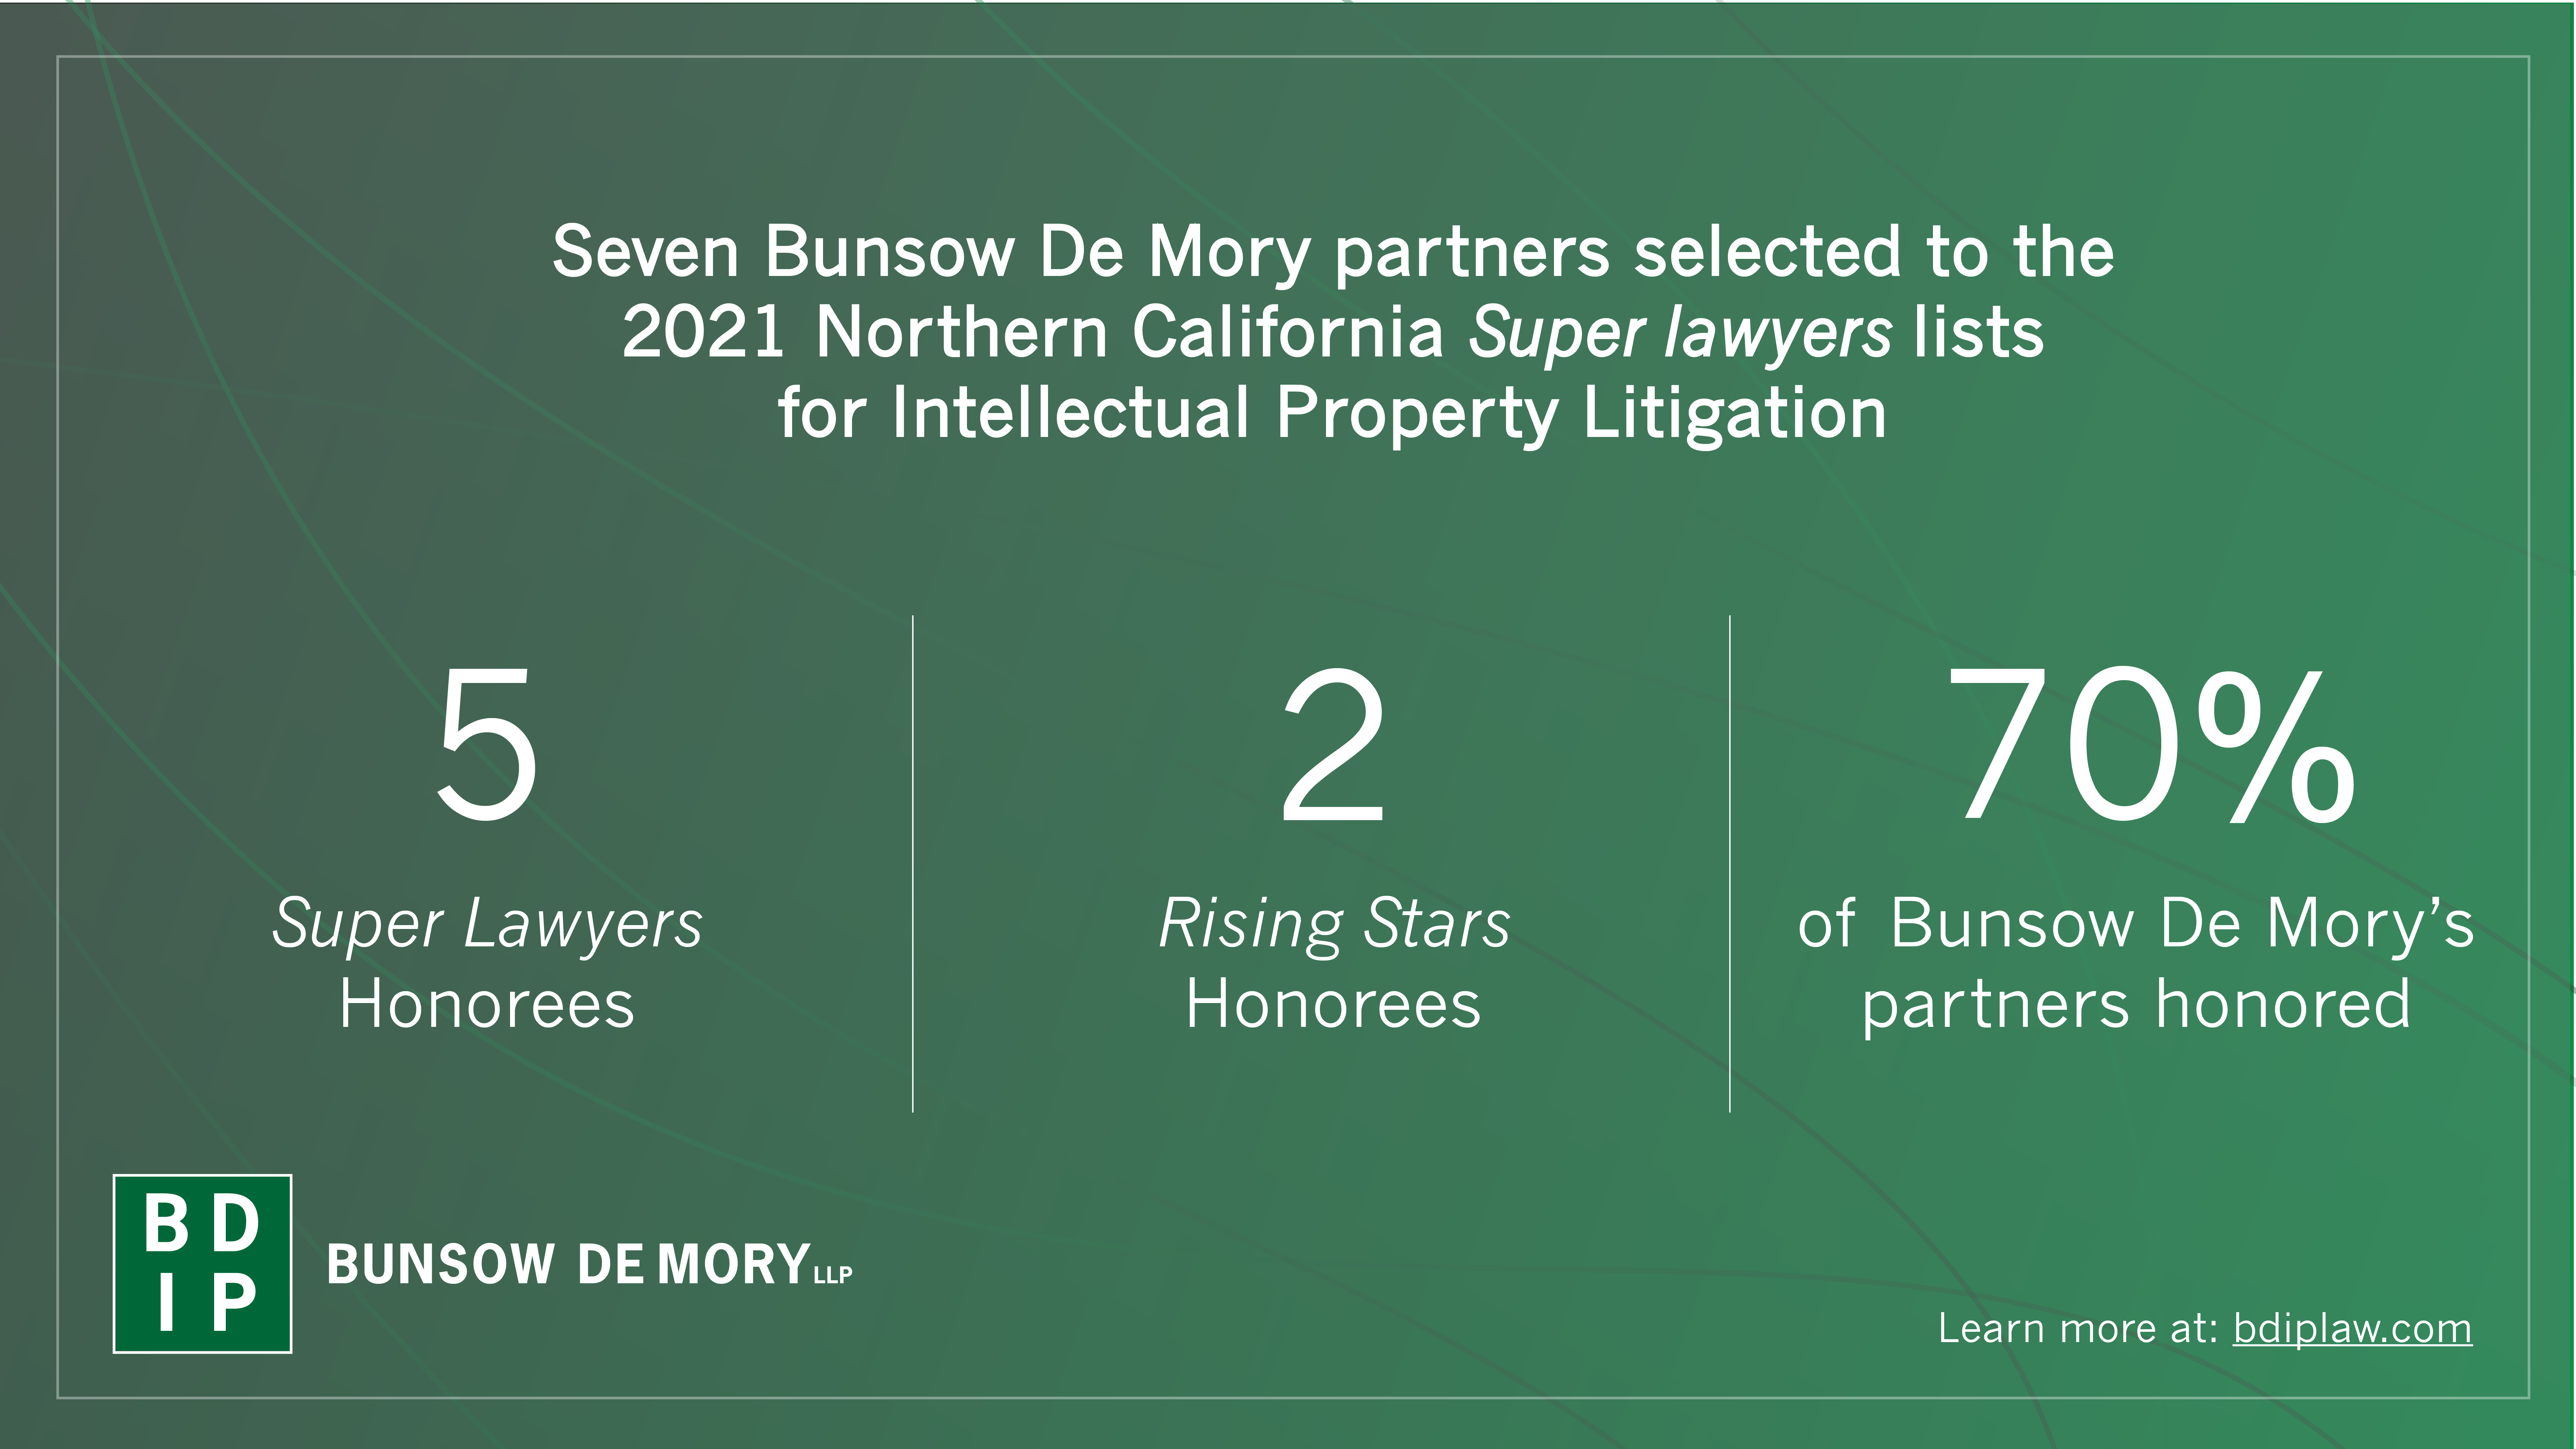 2021 Northern California Super Lawyers Recognizes Bunsow De Mory Attorneys